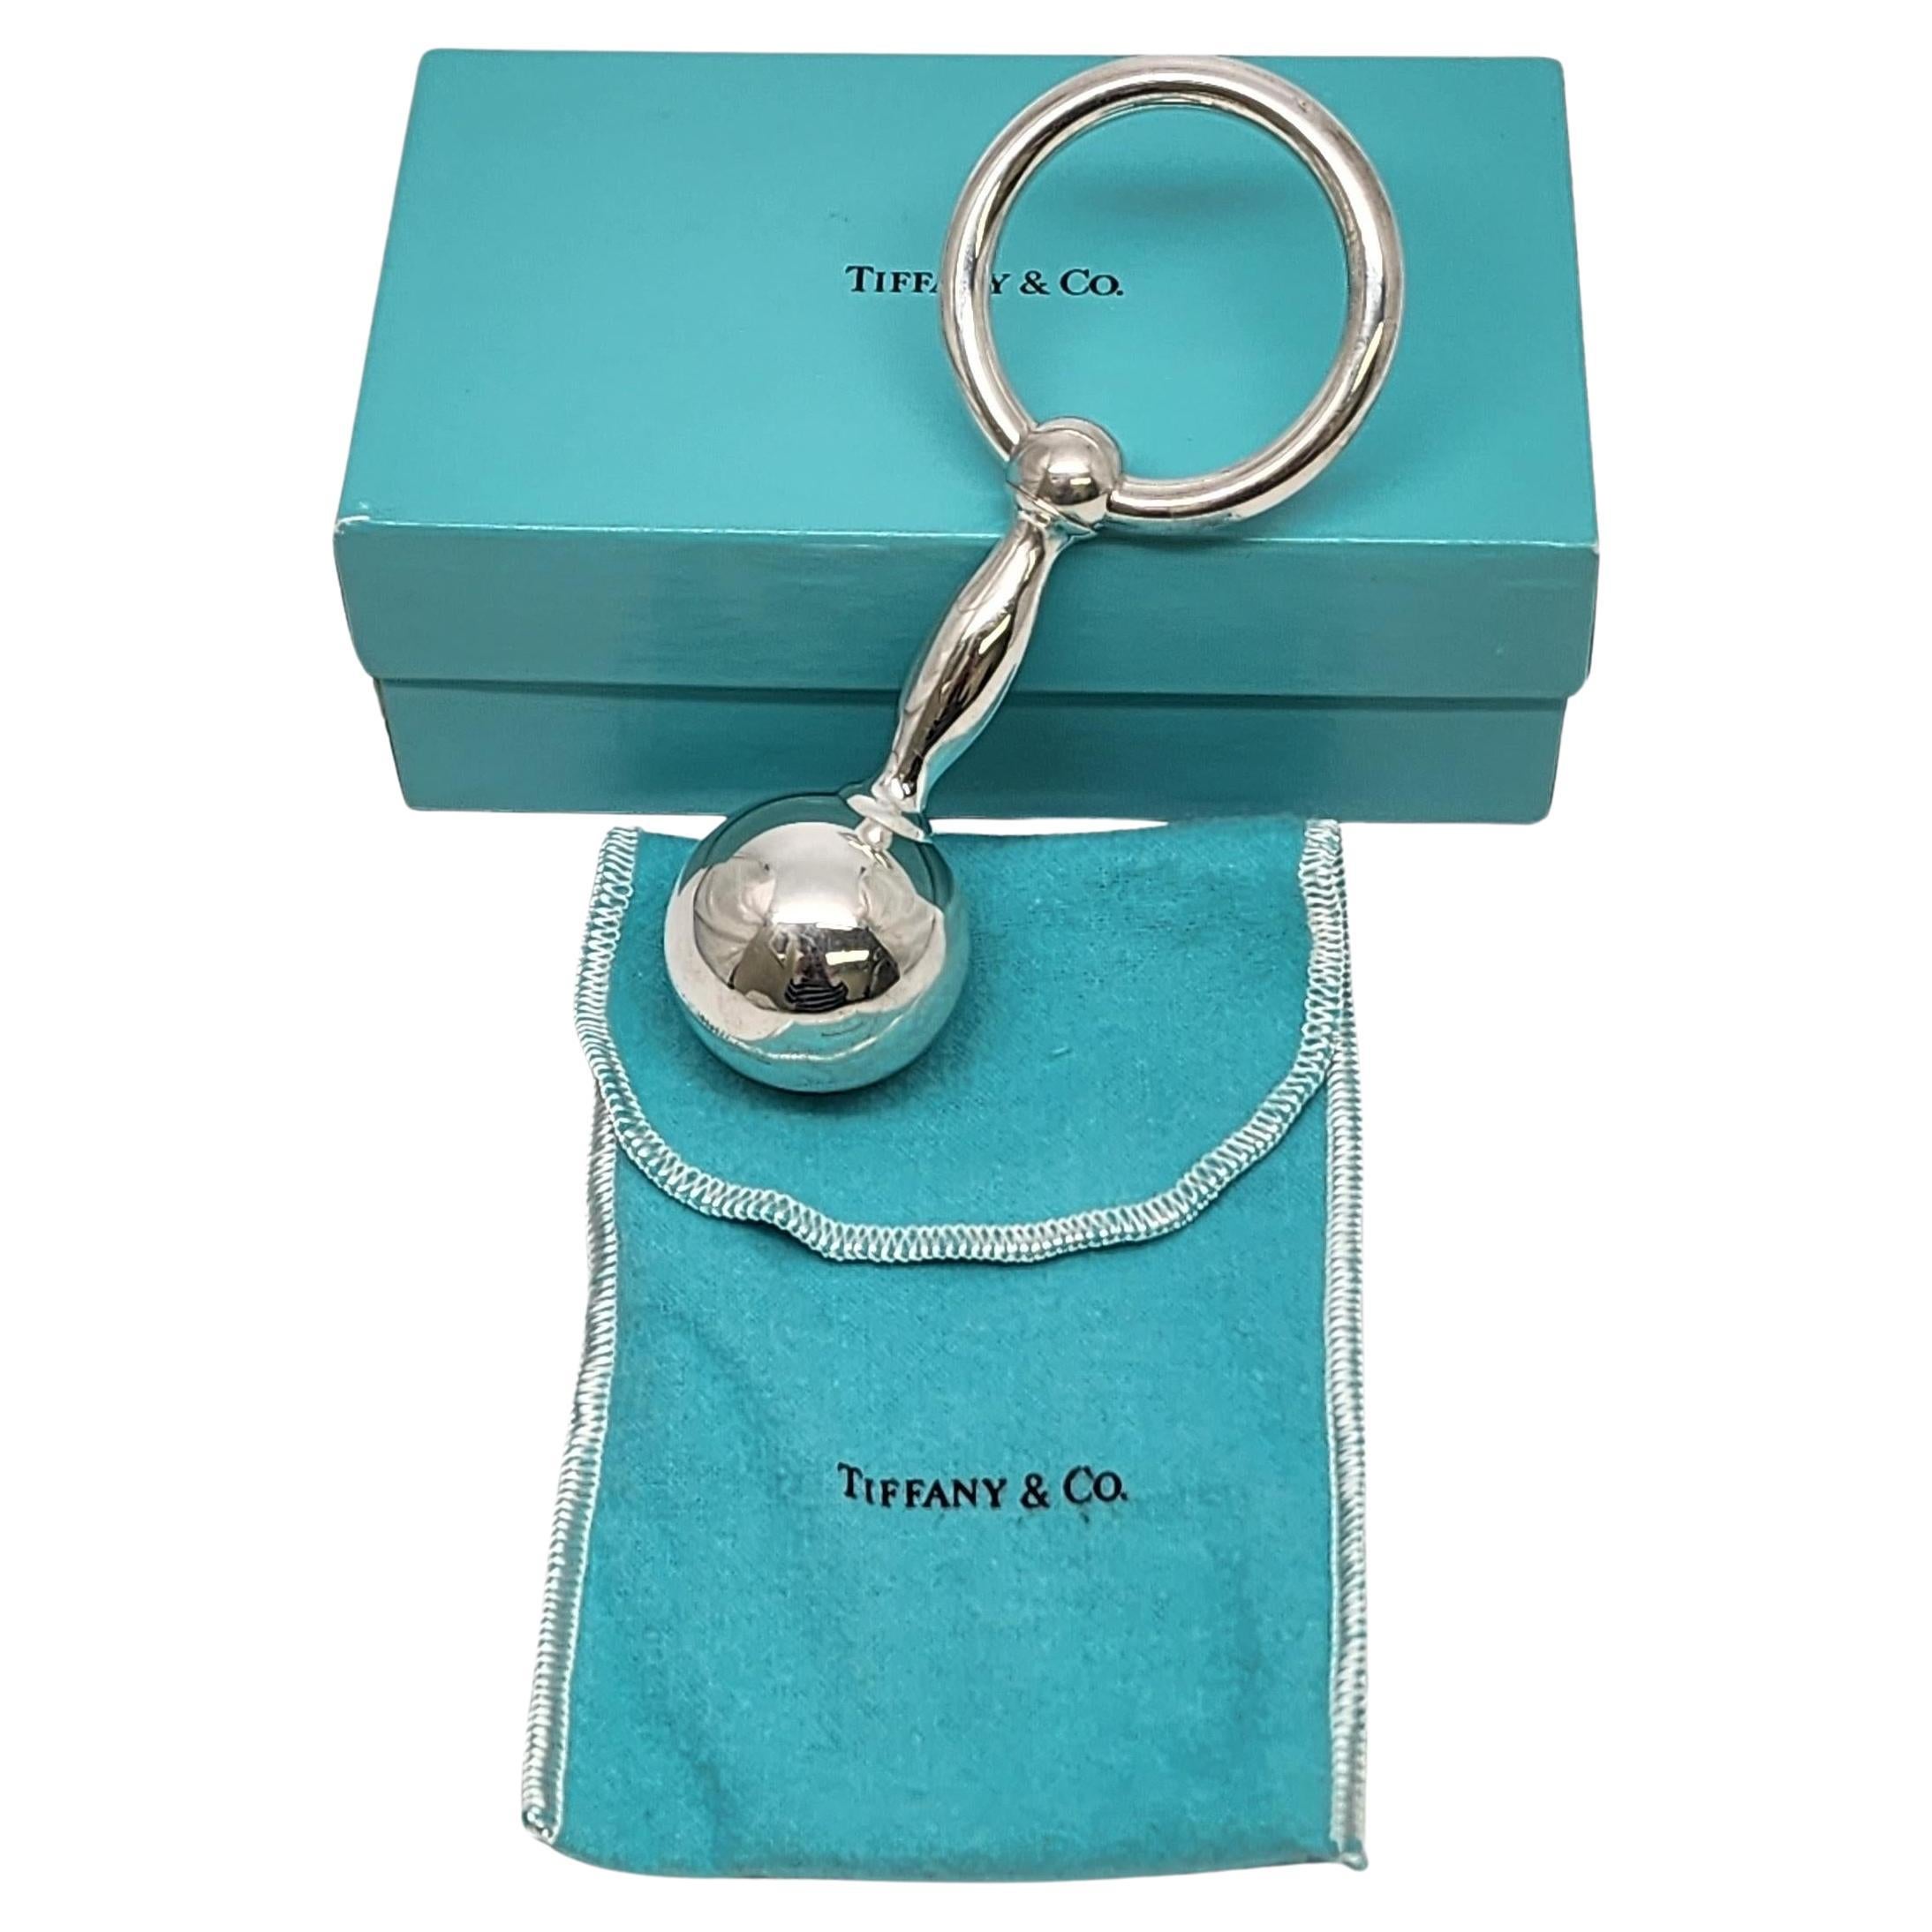 Tiffany & Co Sterling Silver Barbell Teething Ring Rattle w/Pouch and Box #17264 For Sale